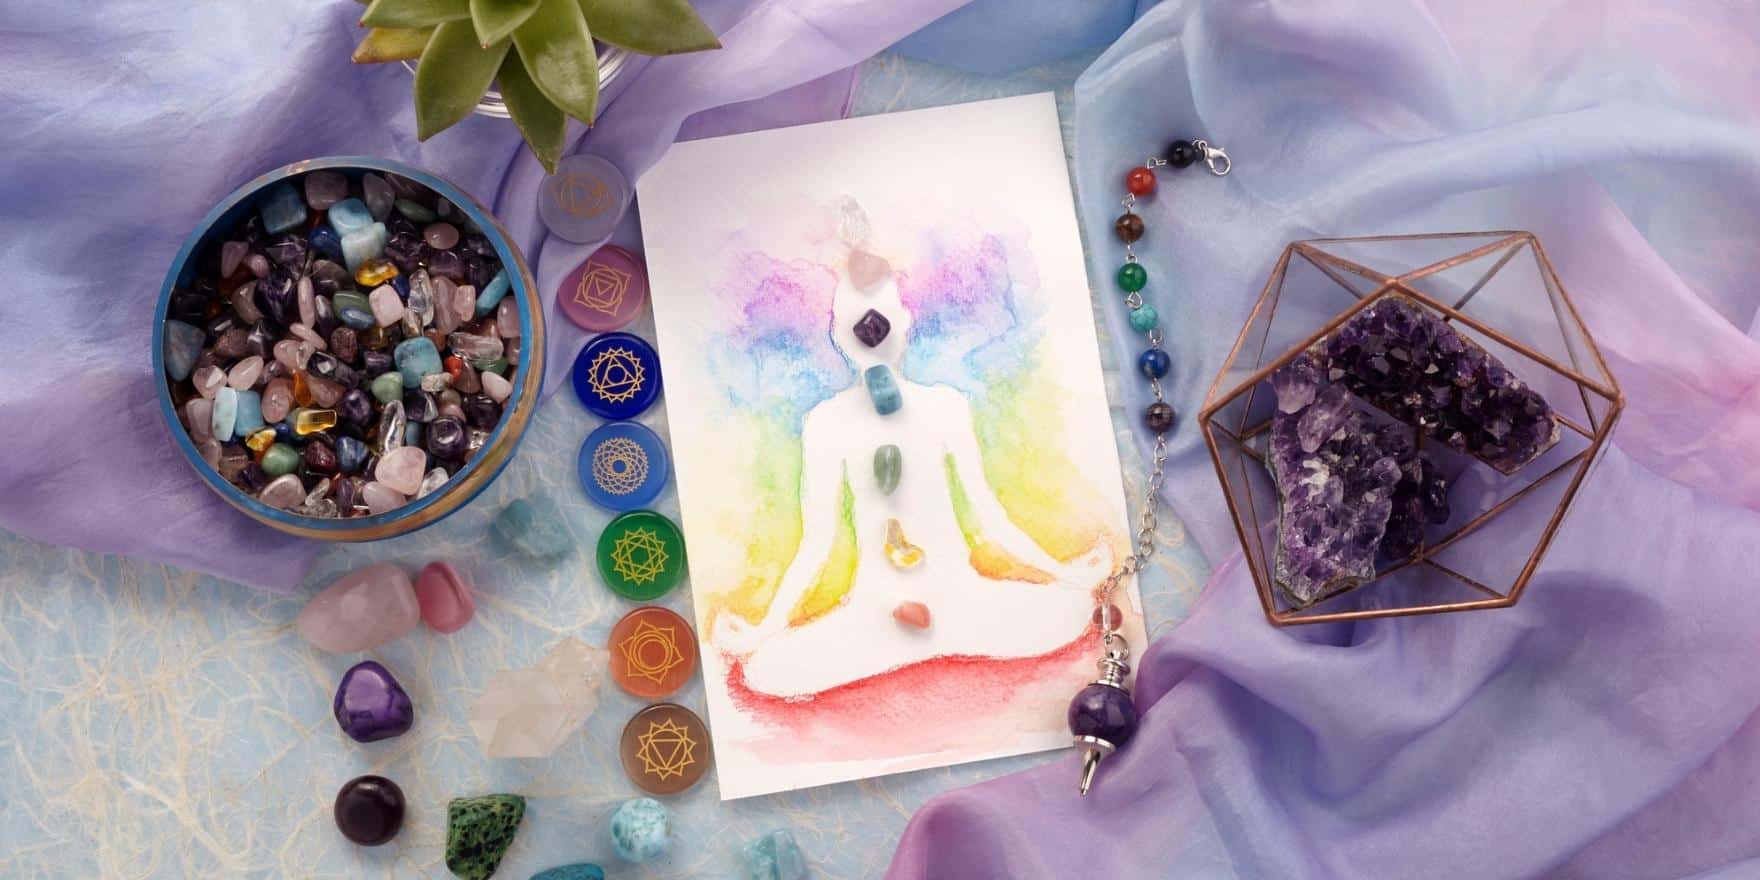 A chakra crystal guide with chakra crystals around it on a purple table